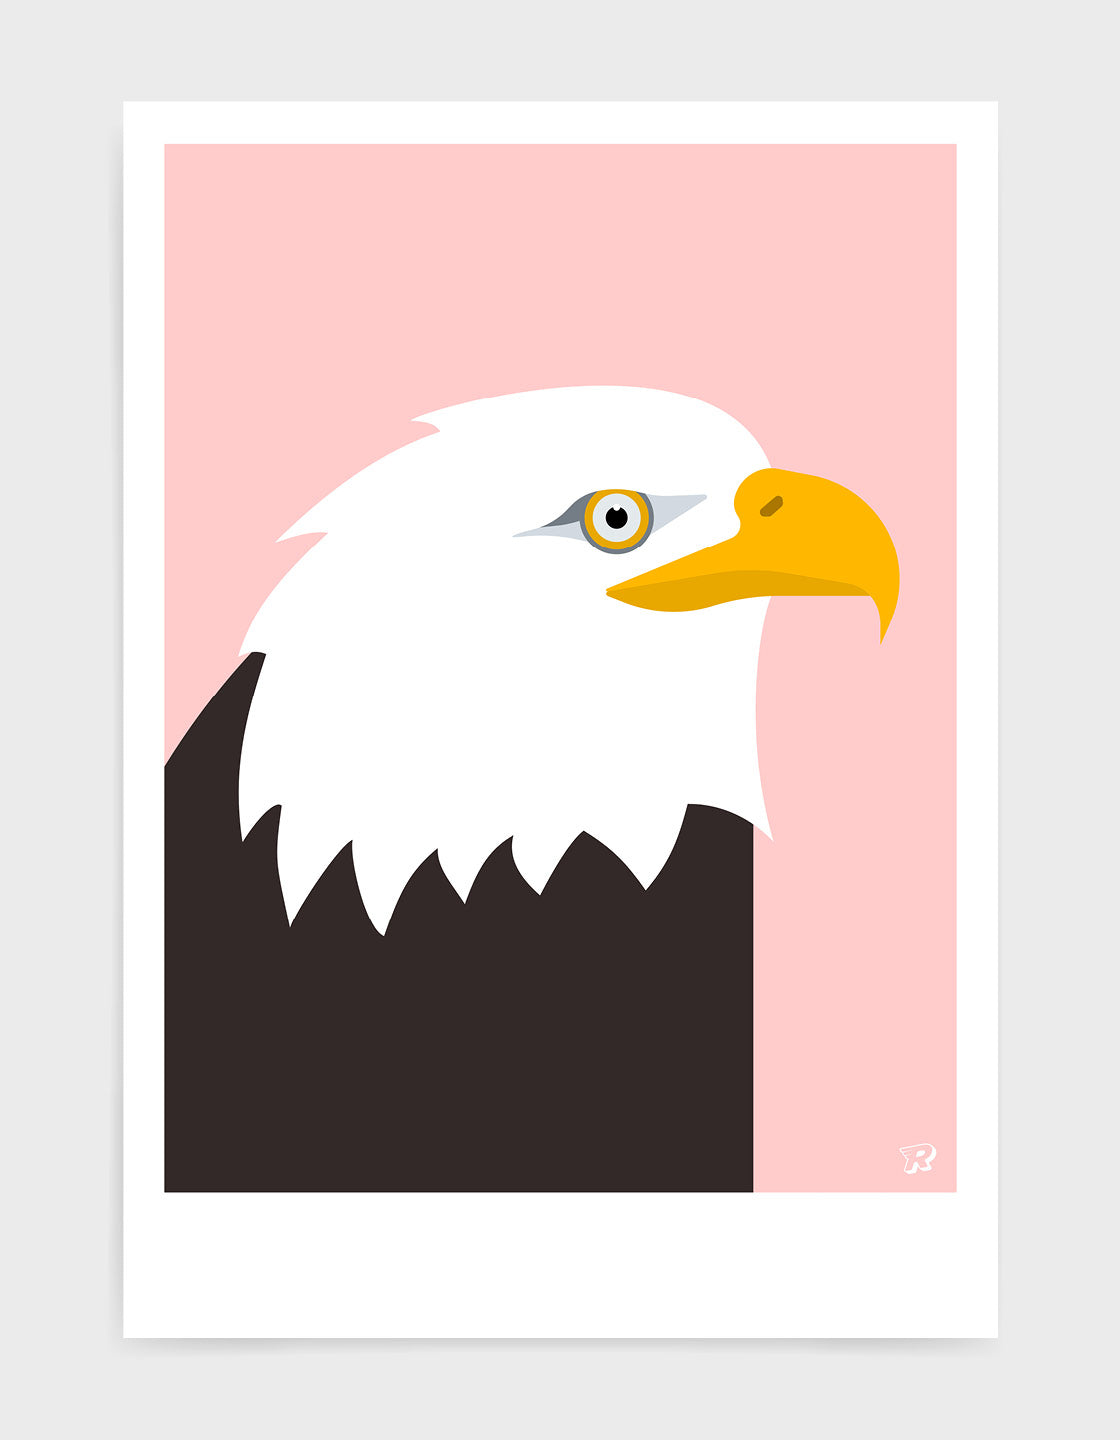 art print of an American bald eagle in profile against a pink background